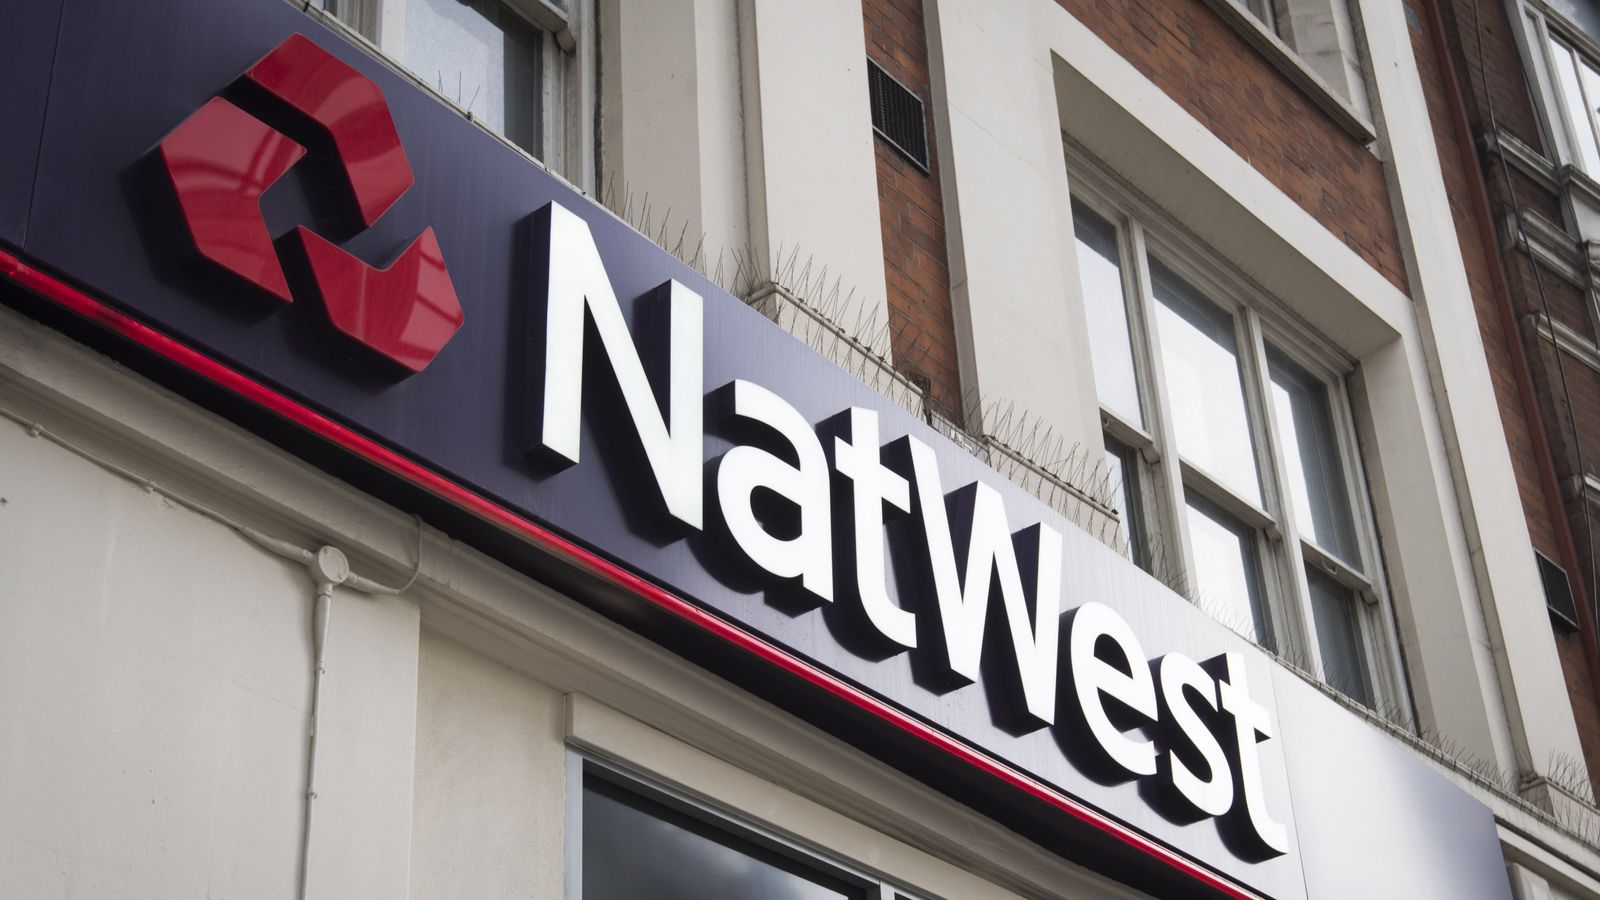 natwest-closures-list-of-all-43-branches-closing-across-uk-is-your-local-bank-one-of-them